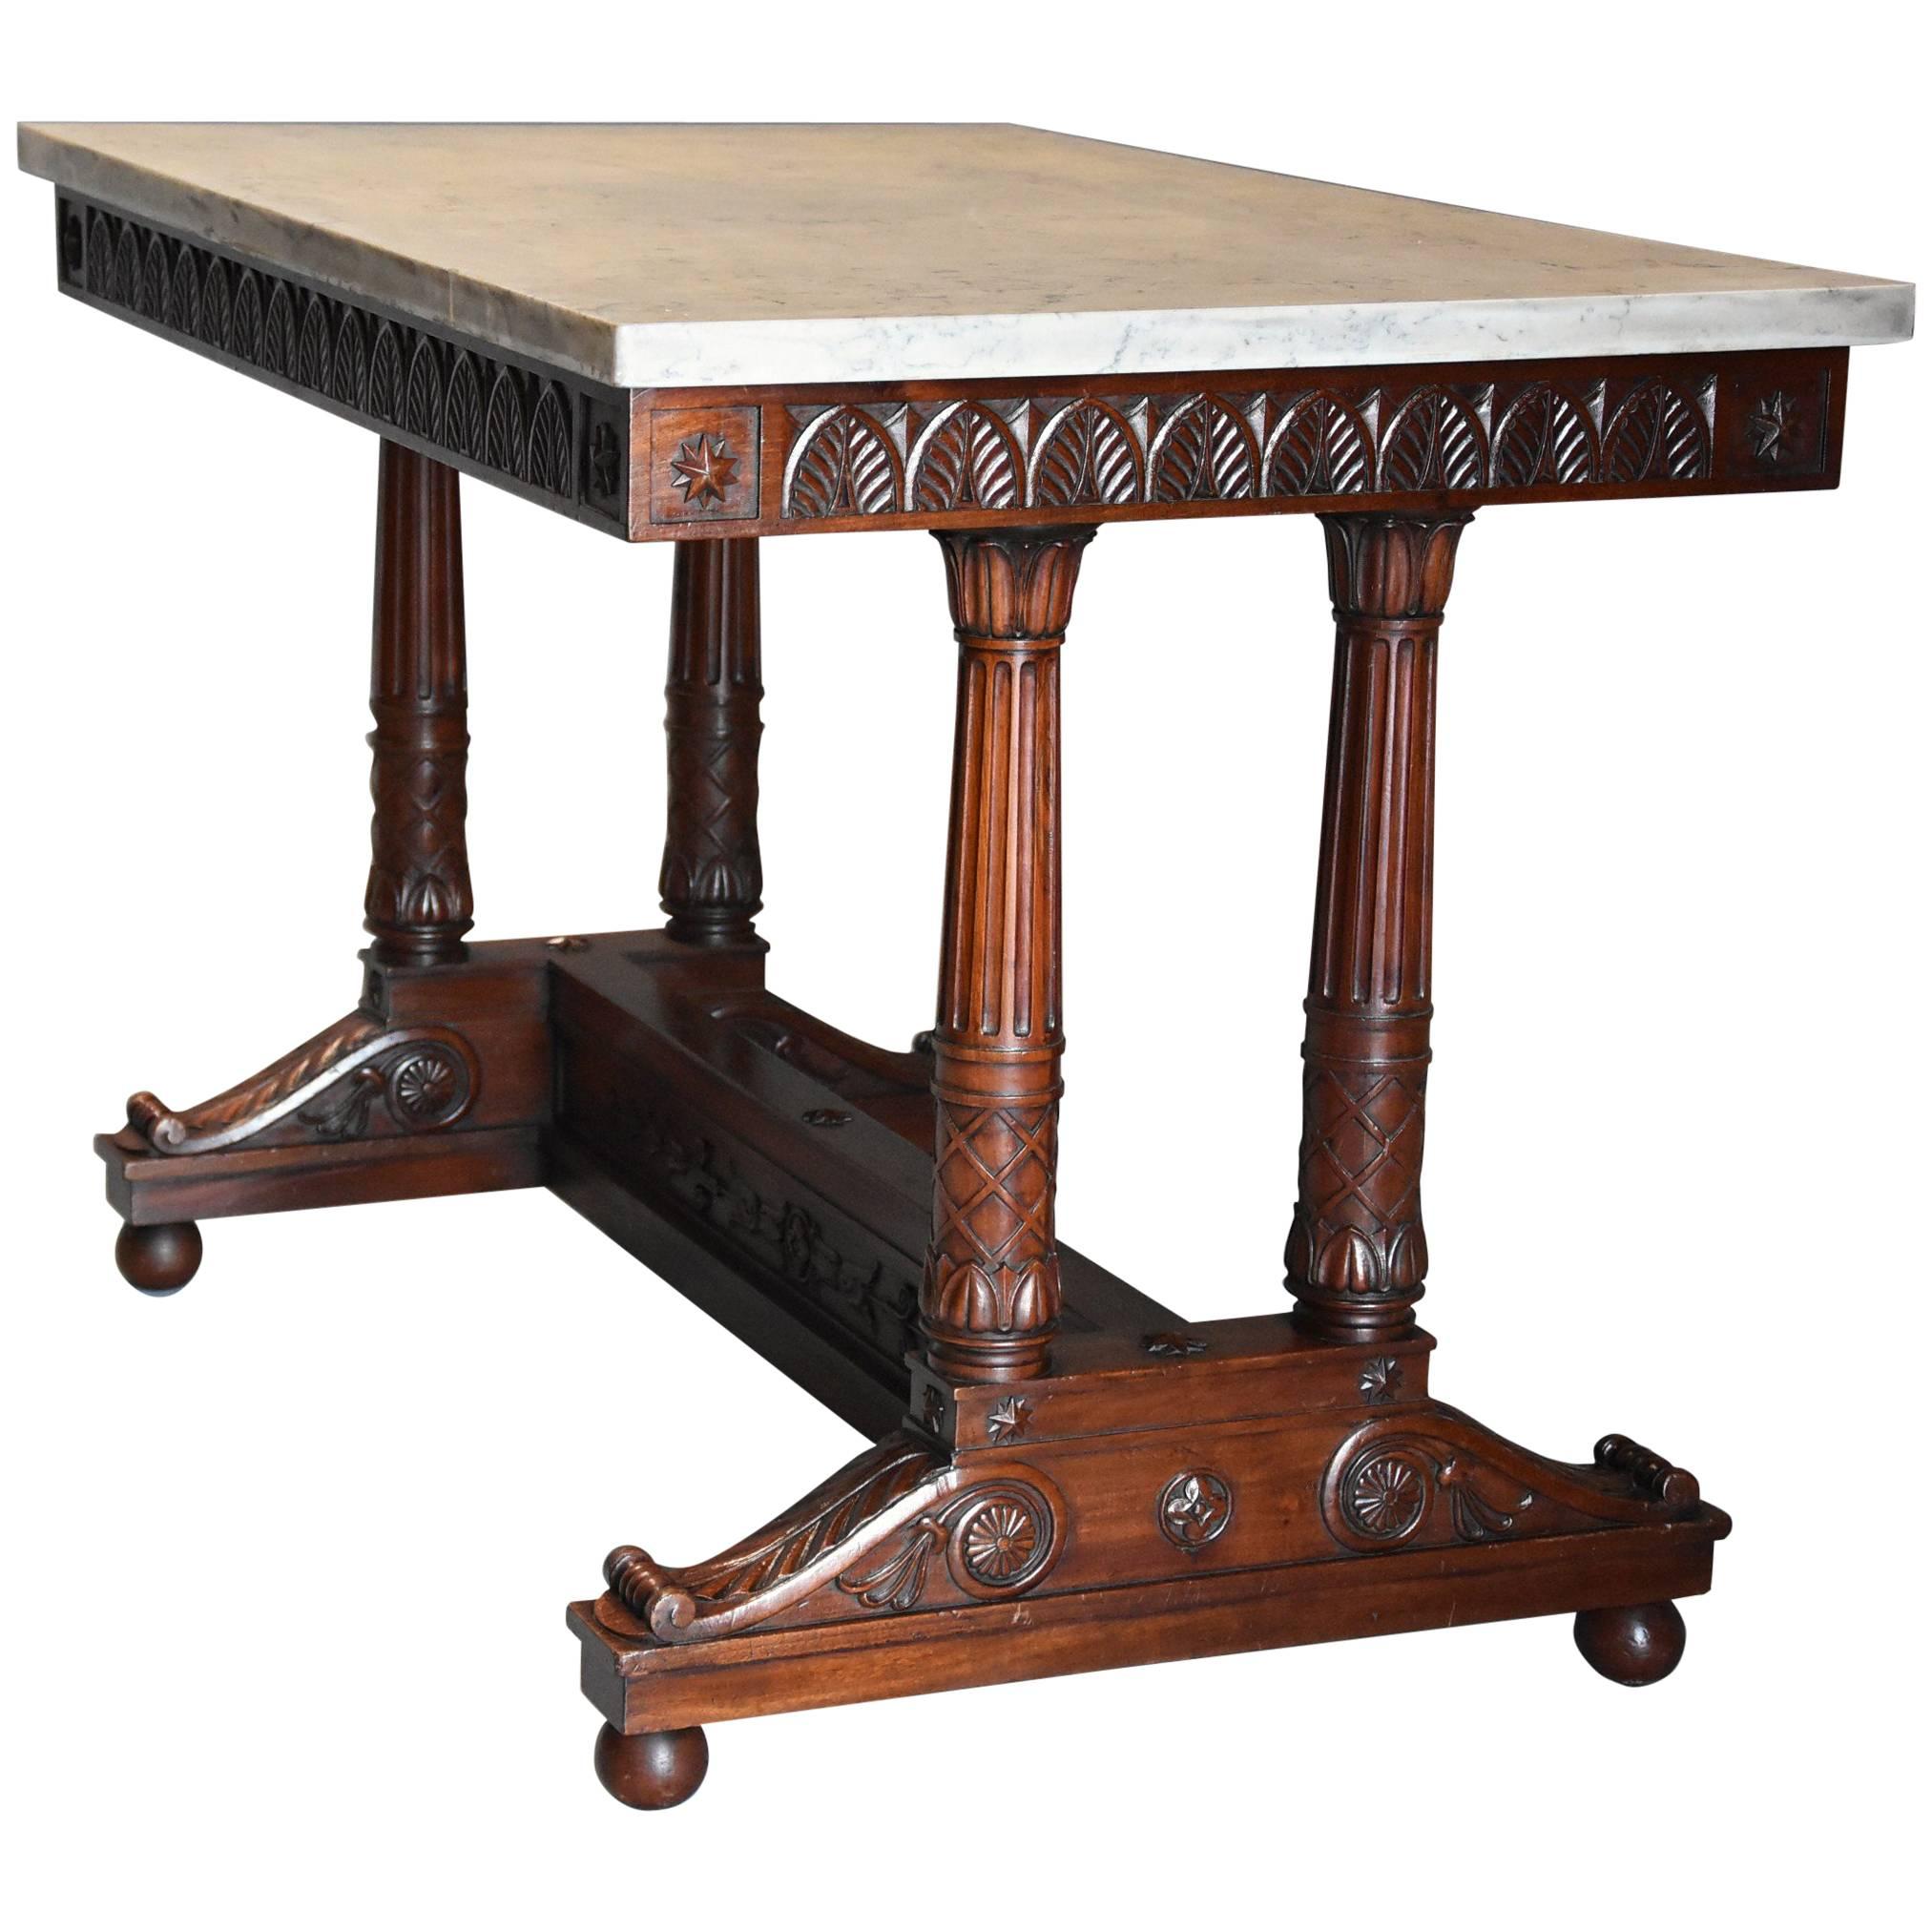 Rare French Empire Oblong Centre Table with Marble Top, Stamped 'JACOB' For Sale